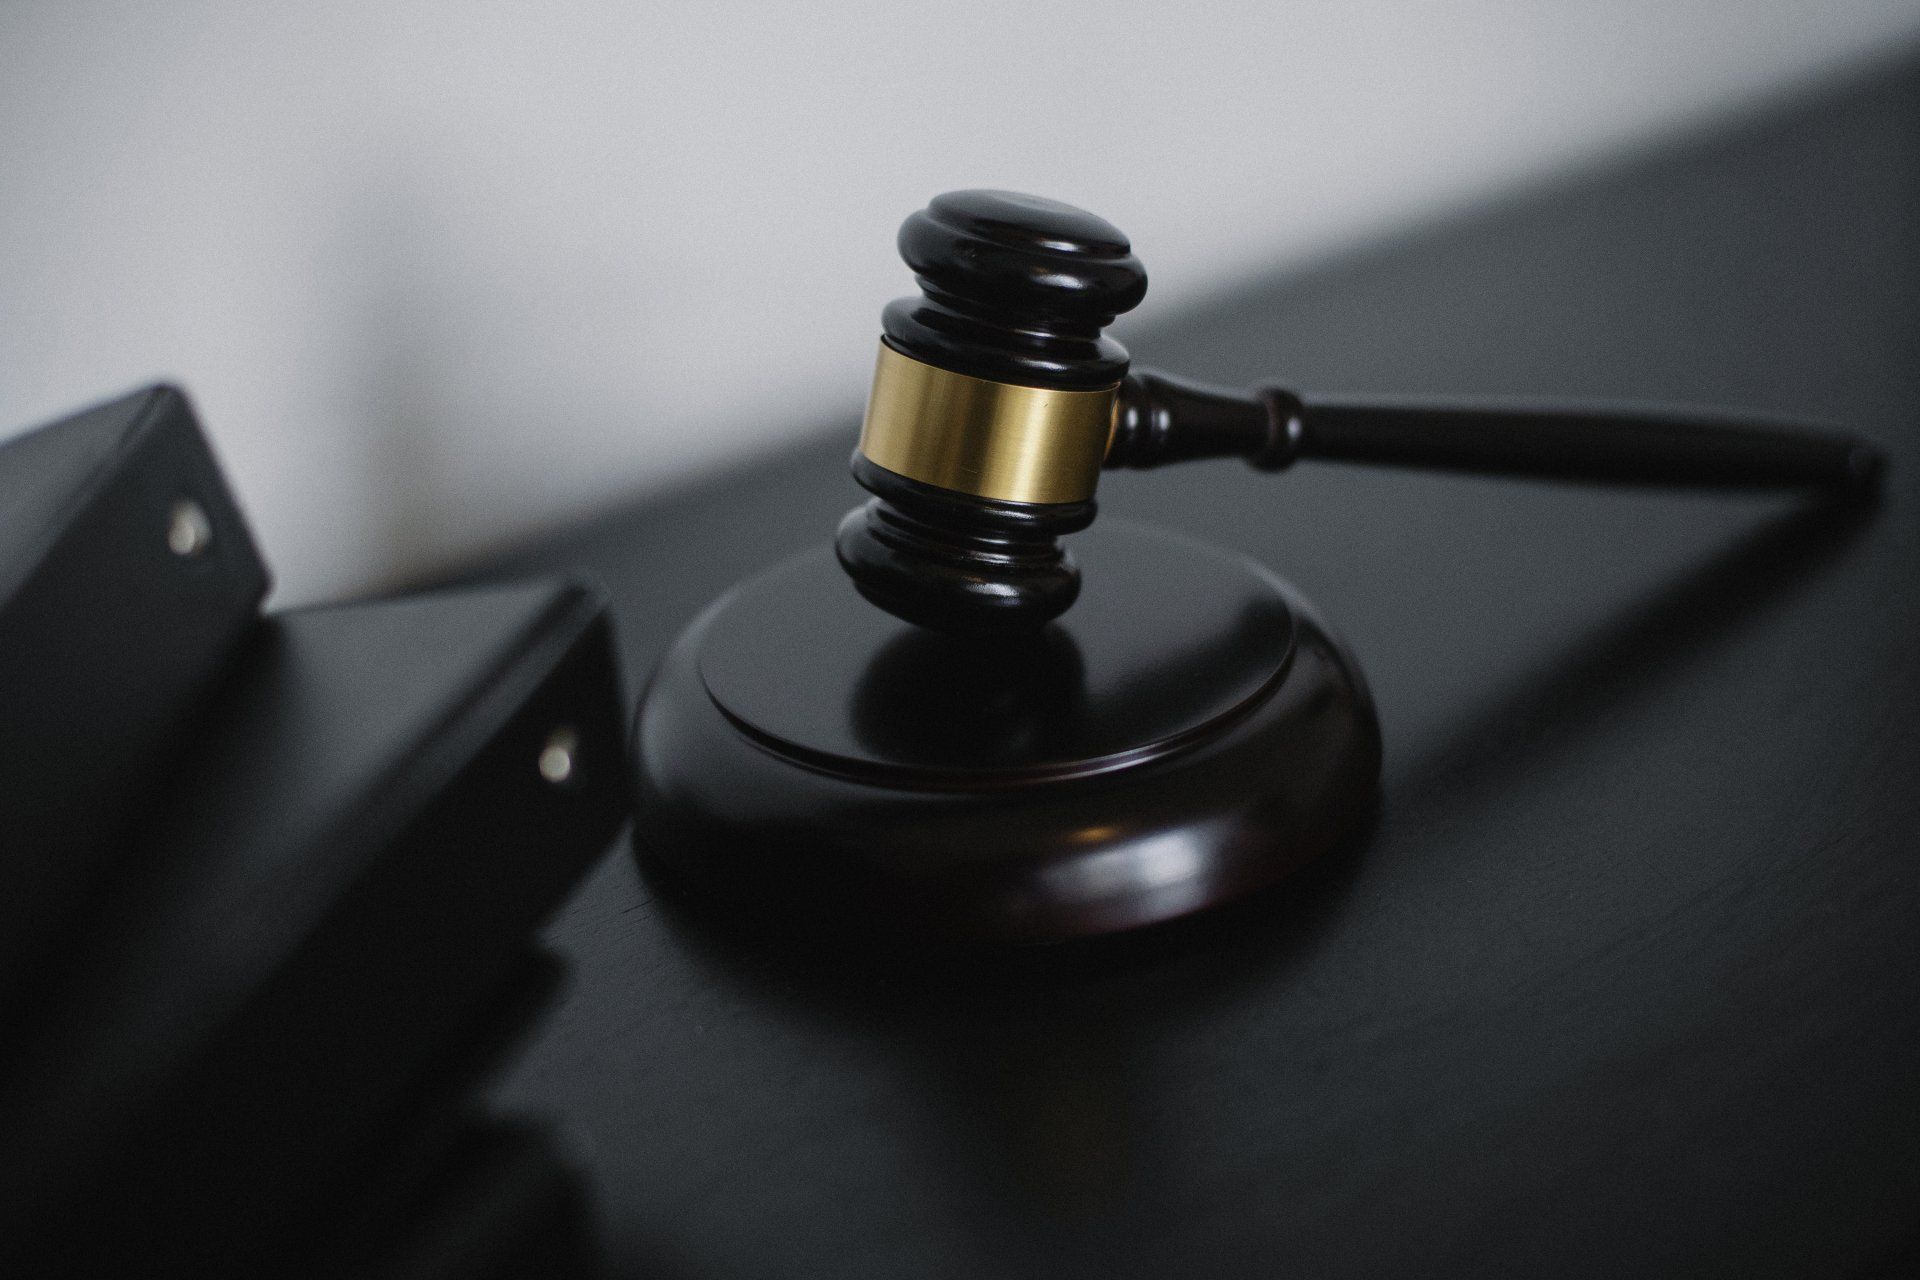 Image of a legal gavel